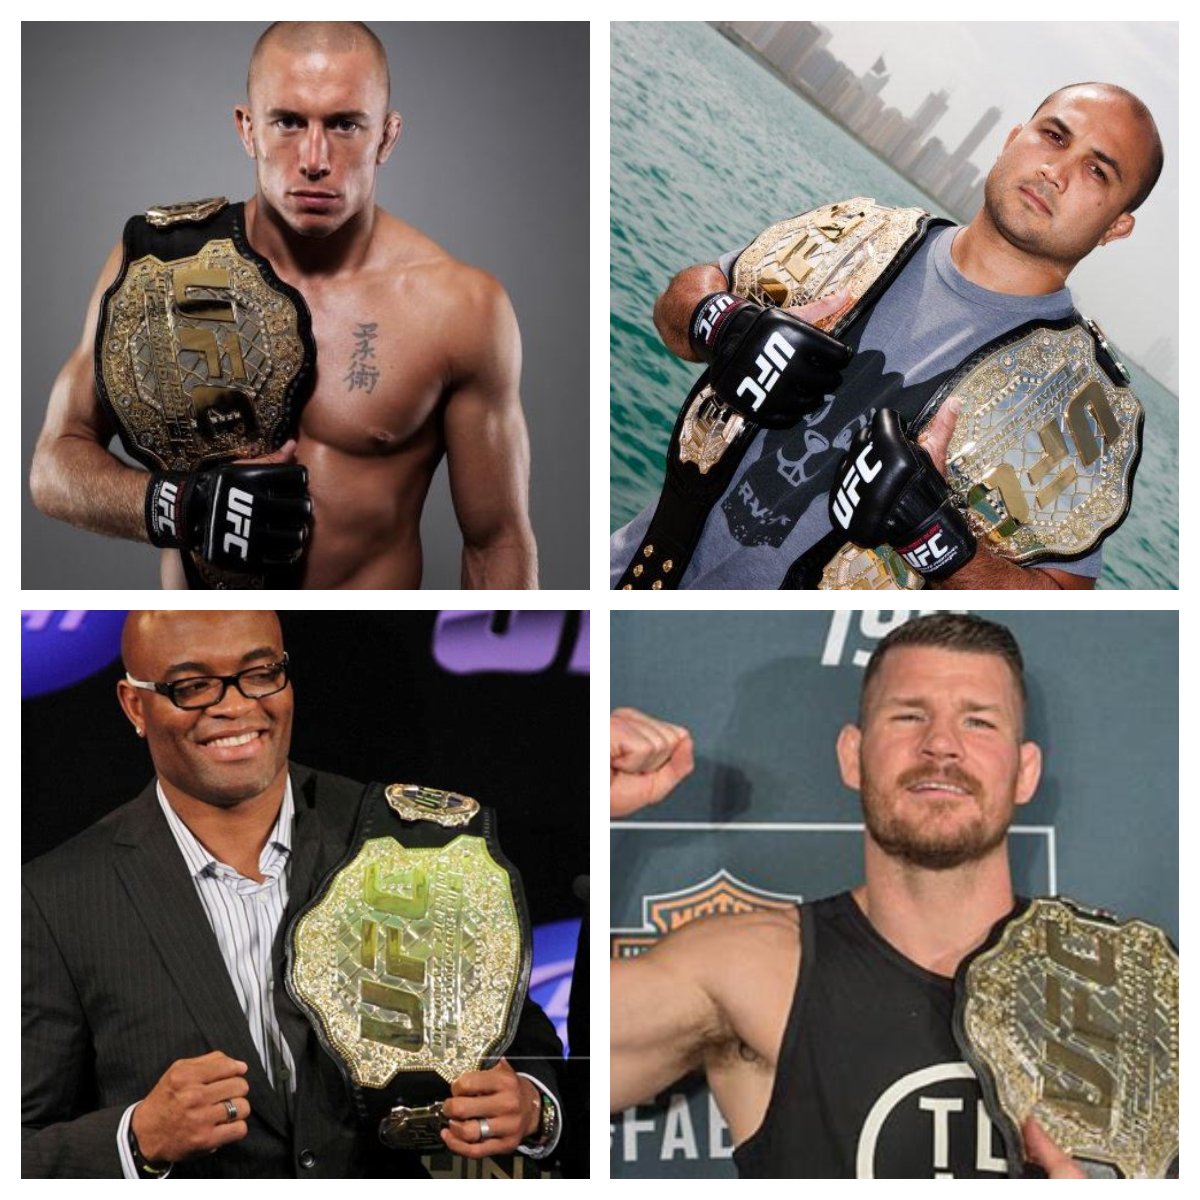 🚨MMA MORNING MATH➕➖➗ Looking at 5 legacy mens divisions- The average champion wins their first #UFC title their 6.7th UFC fight. Averages: Light: 7.6 Welter 7.5 MW: 6.7 L hvy: 6.7 Heavy: 5.4 Bisping 25, RDA 18 the longest Matt Hughes, Frank Sham Maurice Smith won in 1😂